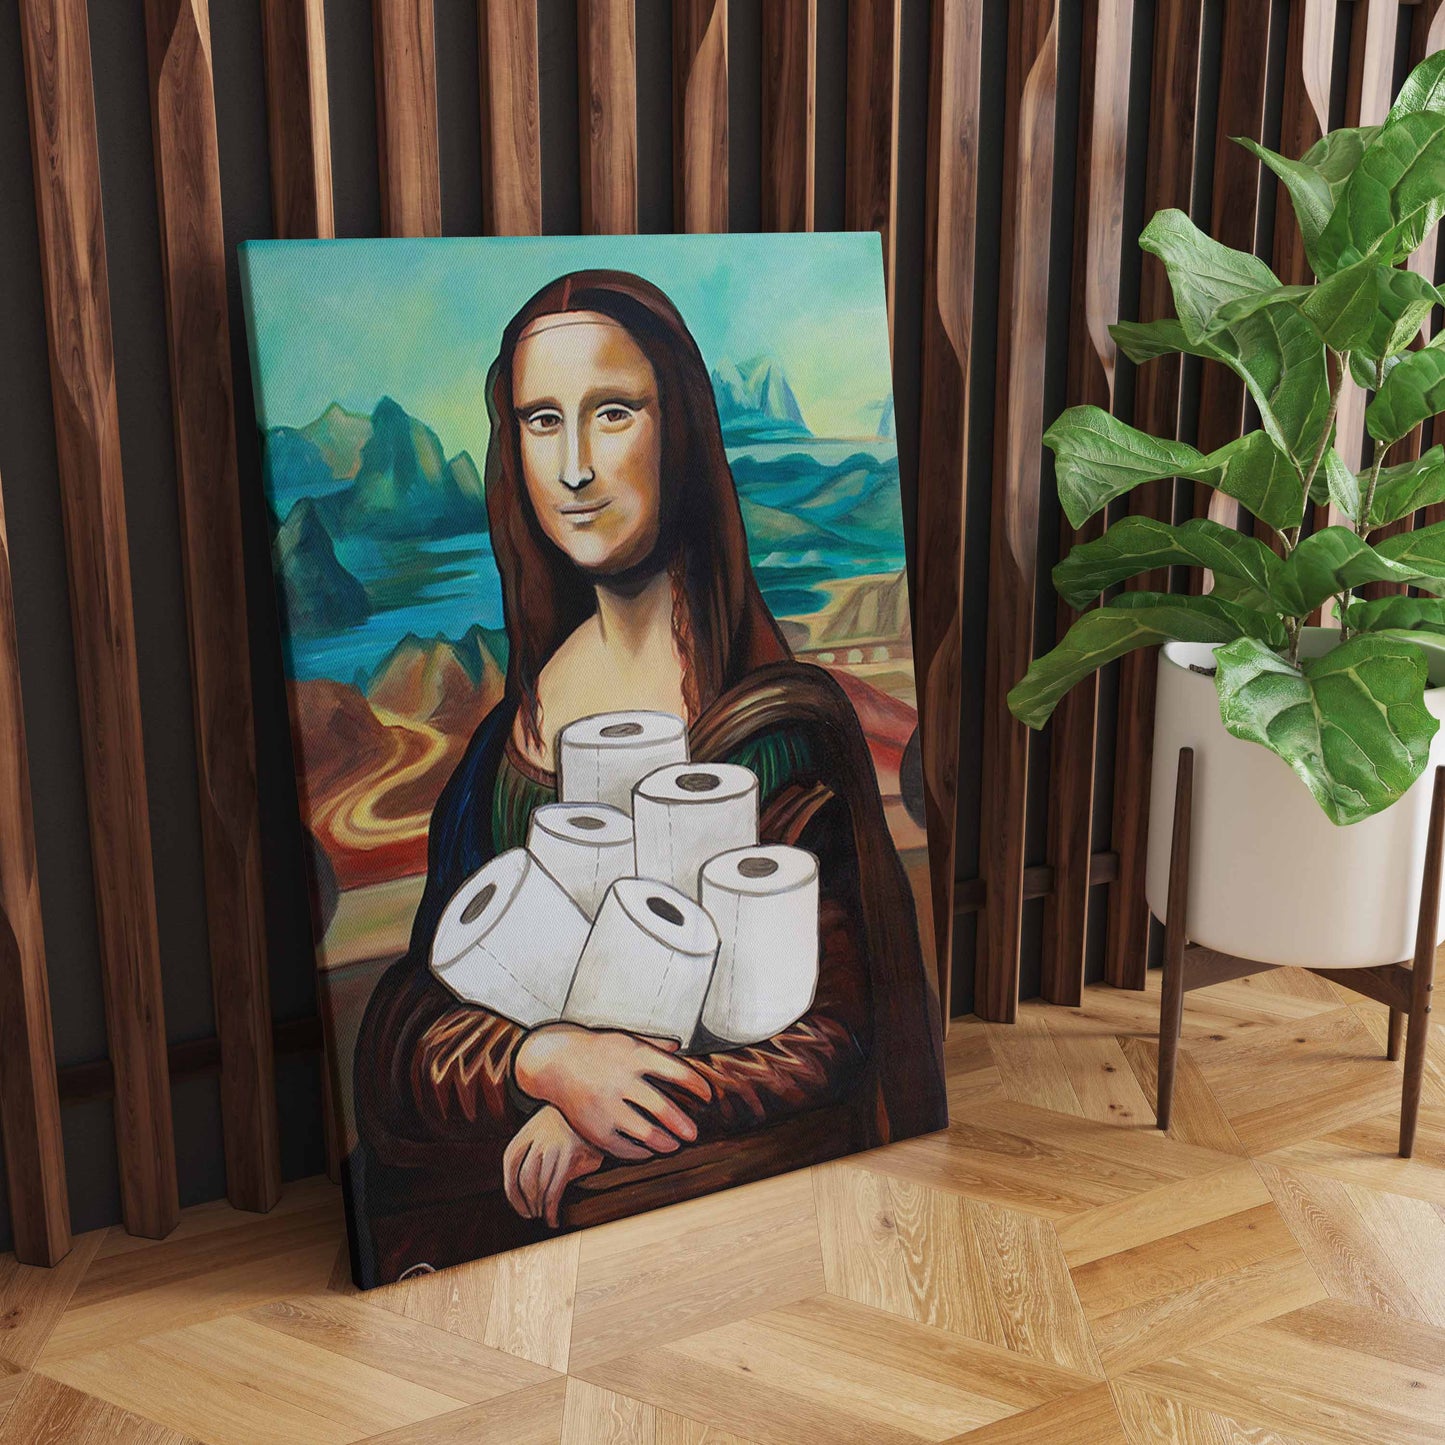 Hilarious Twist, Mona Lisa holding Donuts and Toilet Papers - Funny wall art for Living Room Decor S04E13